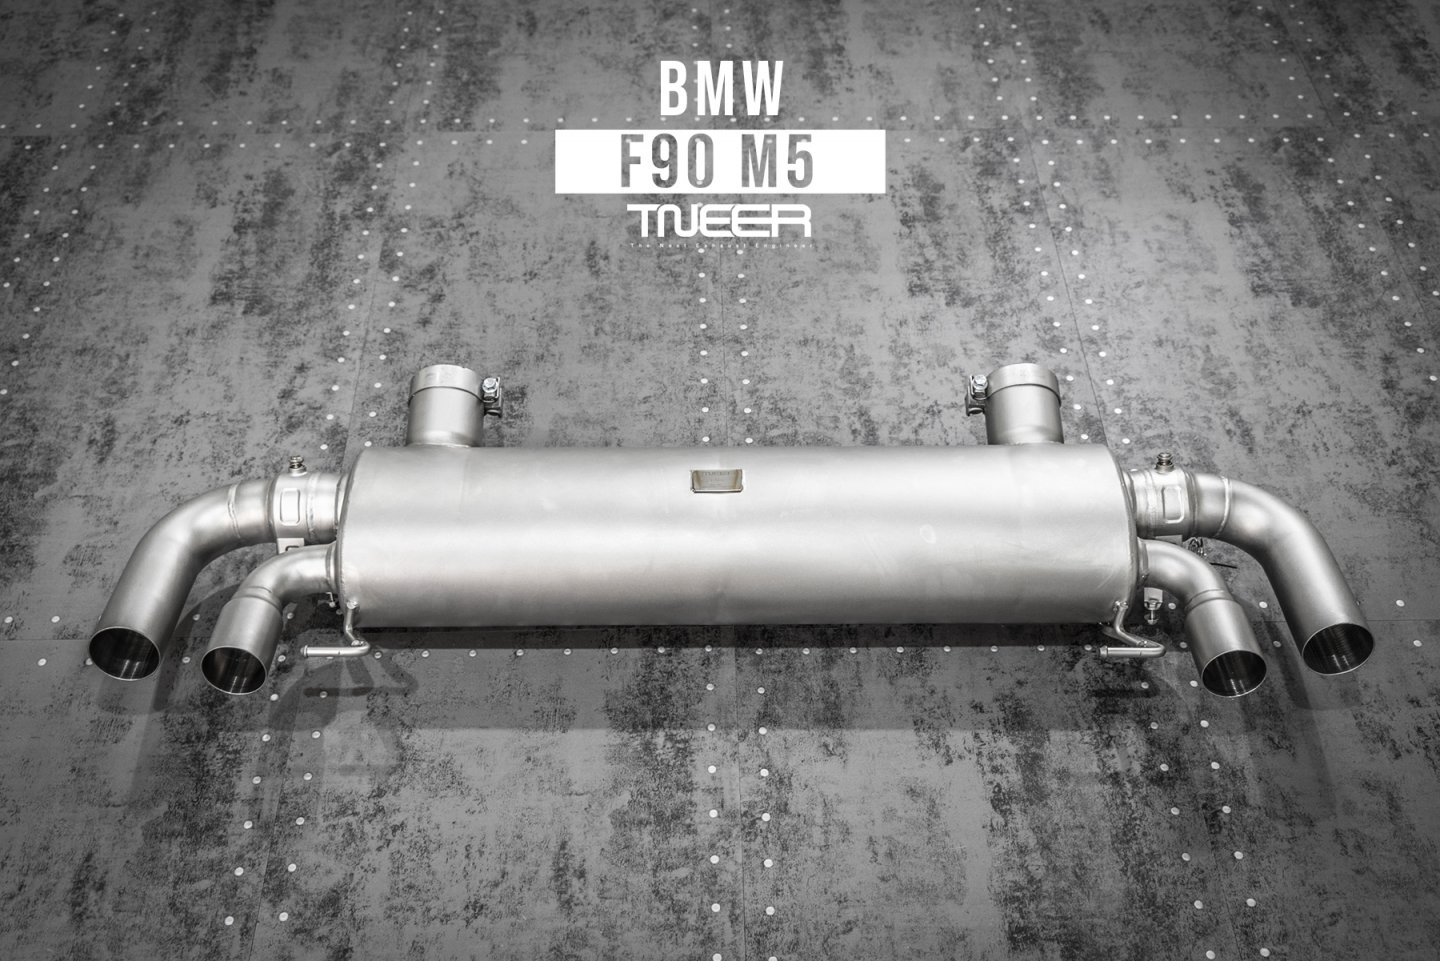 BMW F90 (M5) TNEER Downpipes & Components